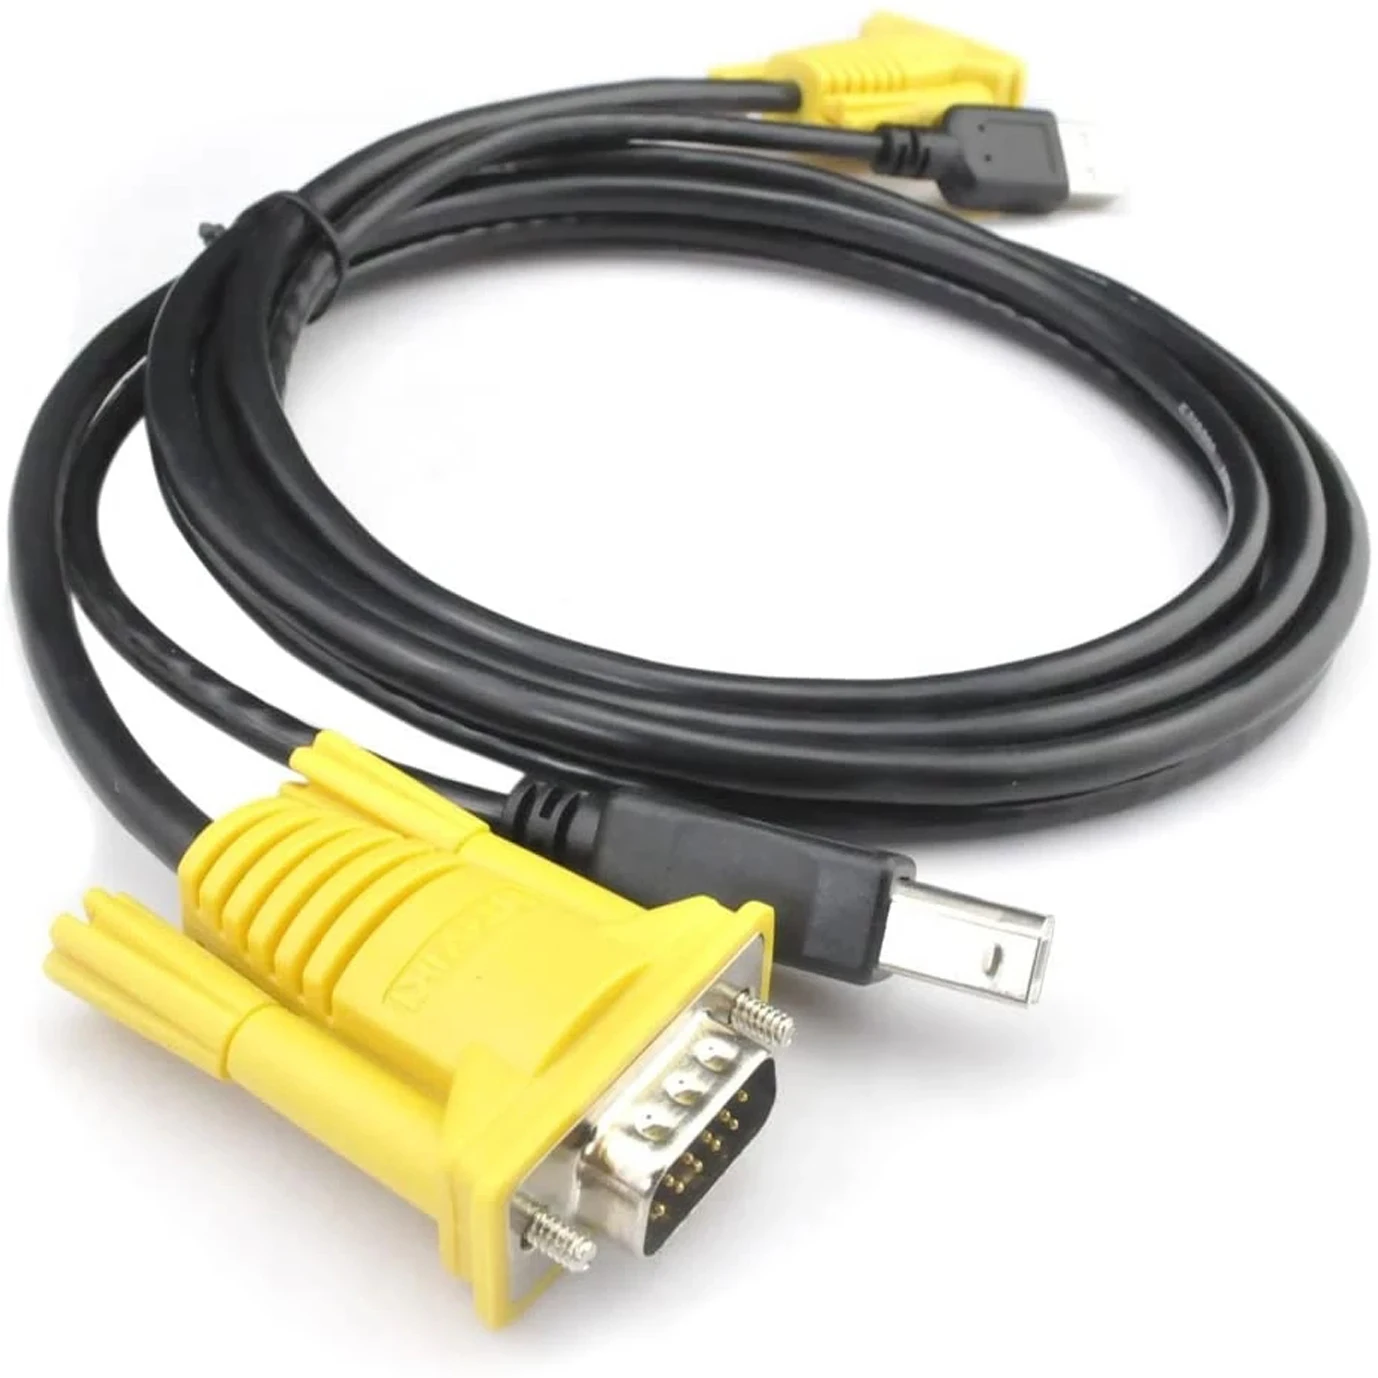 

1.5M USB KVM Switch Cable USB2.0 15Pin VGA Male to Male USB A to USB B Cord Cables PC Computer Printer Monitor Adapter Converter